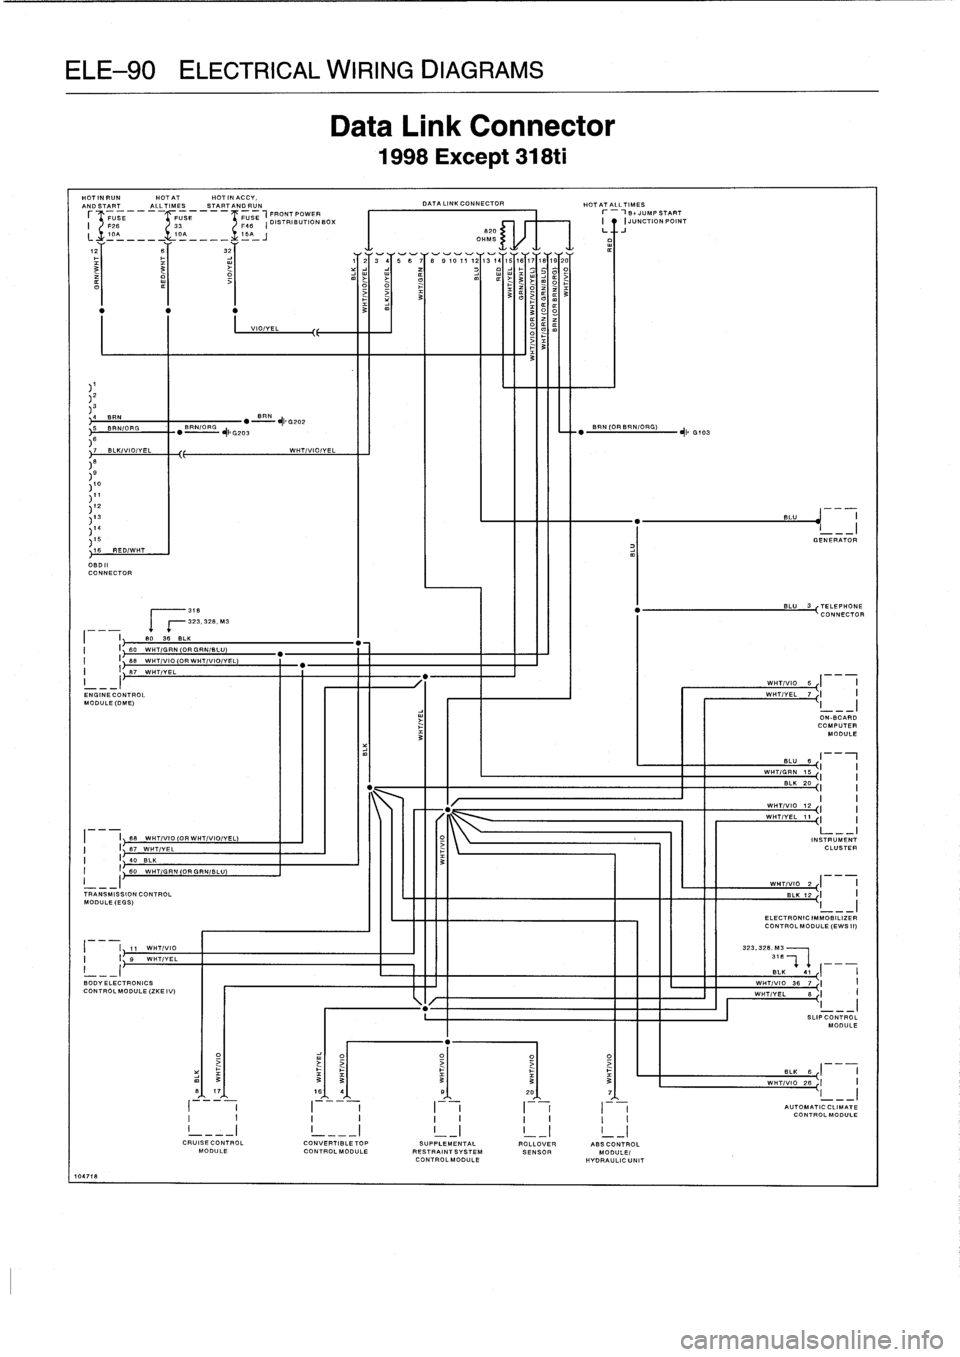 BMW 318i 1997 E36 Service Manual 
ELE-90
ELECTRICAL
WIRING
DIAGRAMS

HOTINRUN

	

HOT
AT

	

HOT
IN
ACCY,
AND7SIlTART

	

ALLTI-I-,
MES

	

START~A
.
NORUN
I
FUSE

	

USE

	

+
FUSE,
FRONTPOWER
I

	

/
F26

	

)
33

	

/
F46

	

I
D